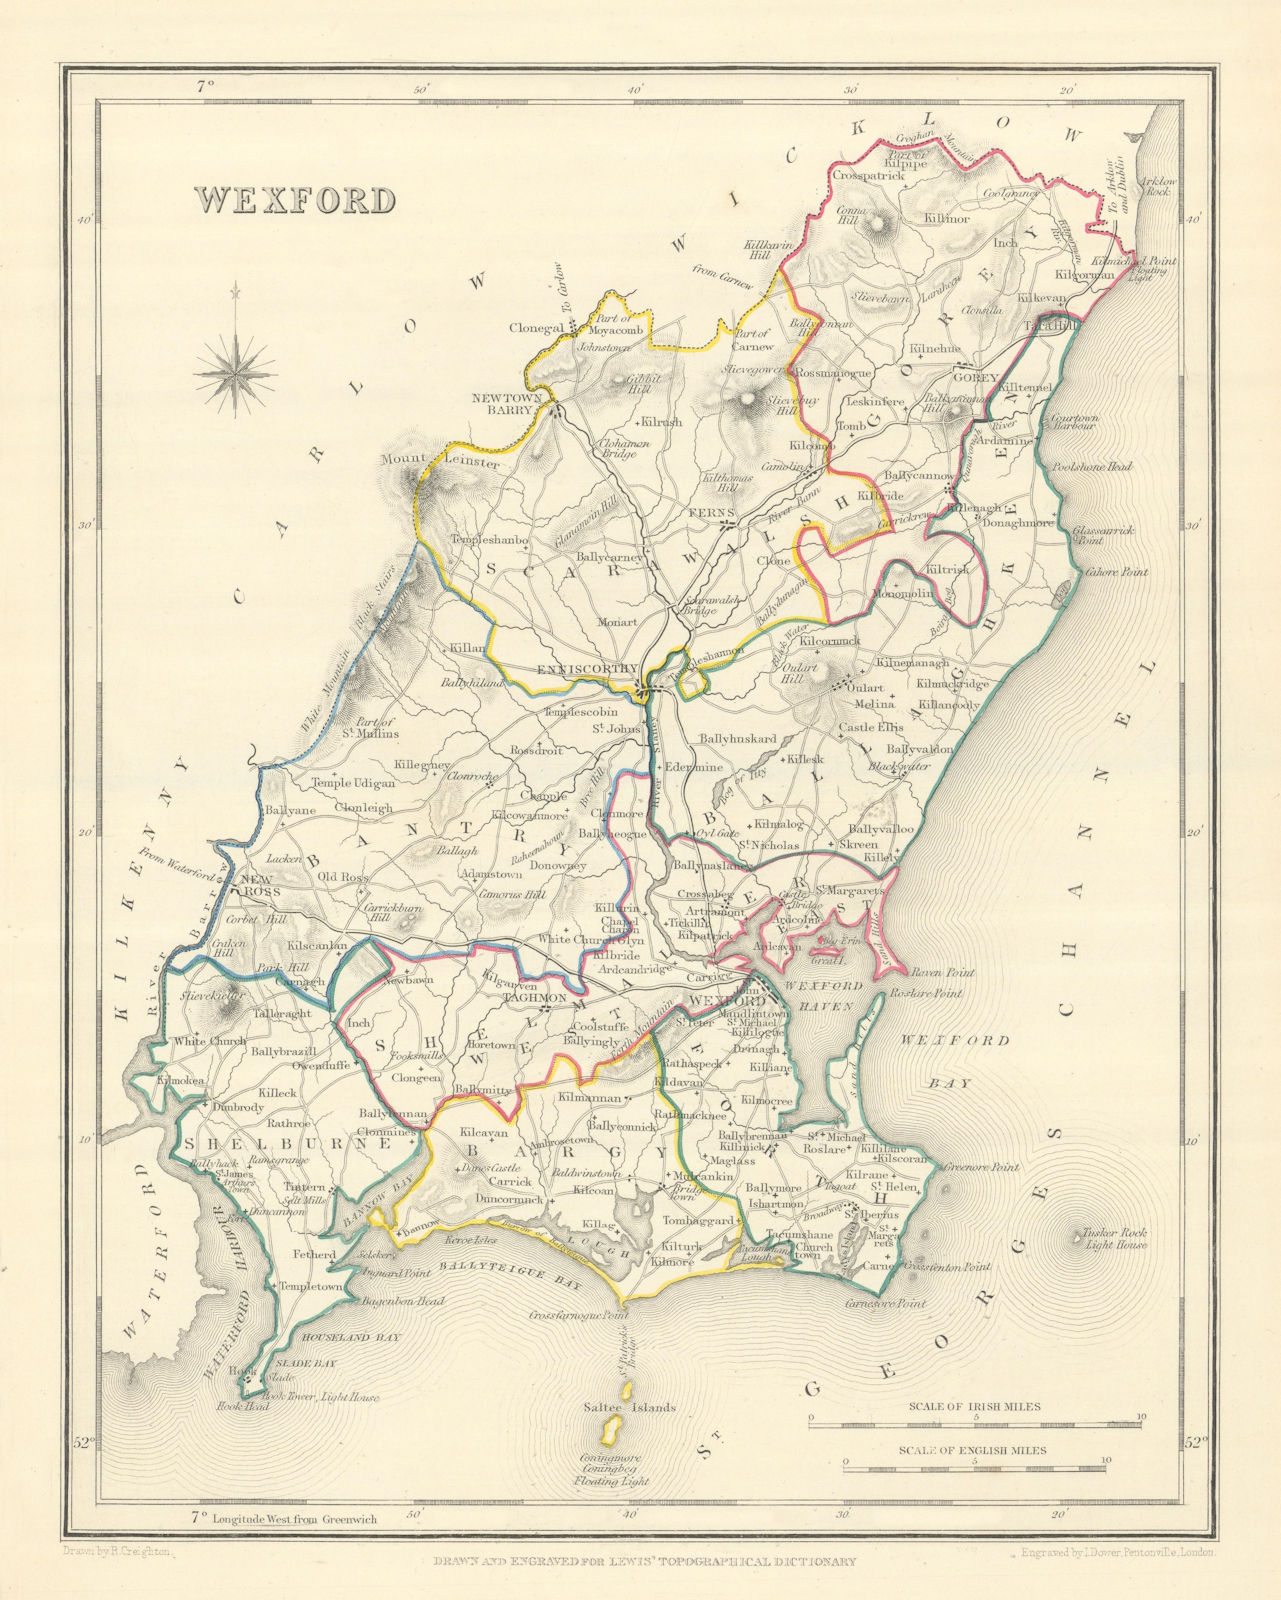 COUNTY WEXFORD antique map for LEWIS by CREIGHTON & DOWER. Ireland 1850